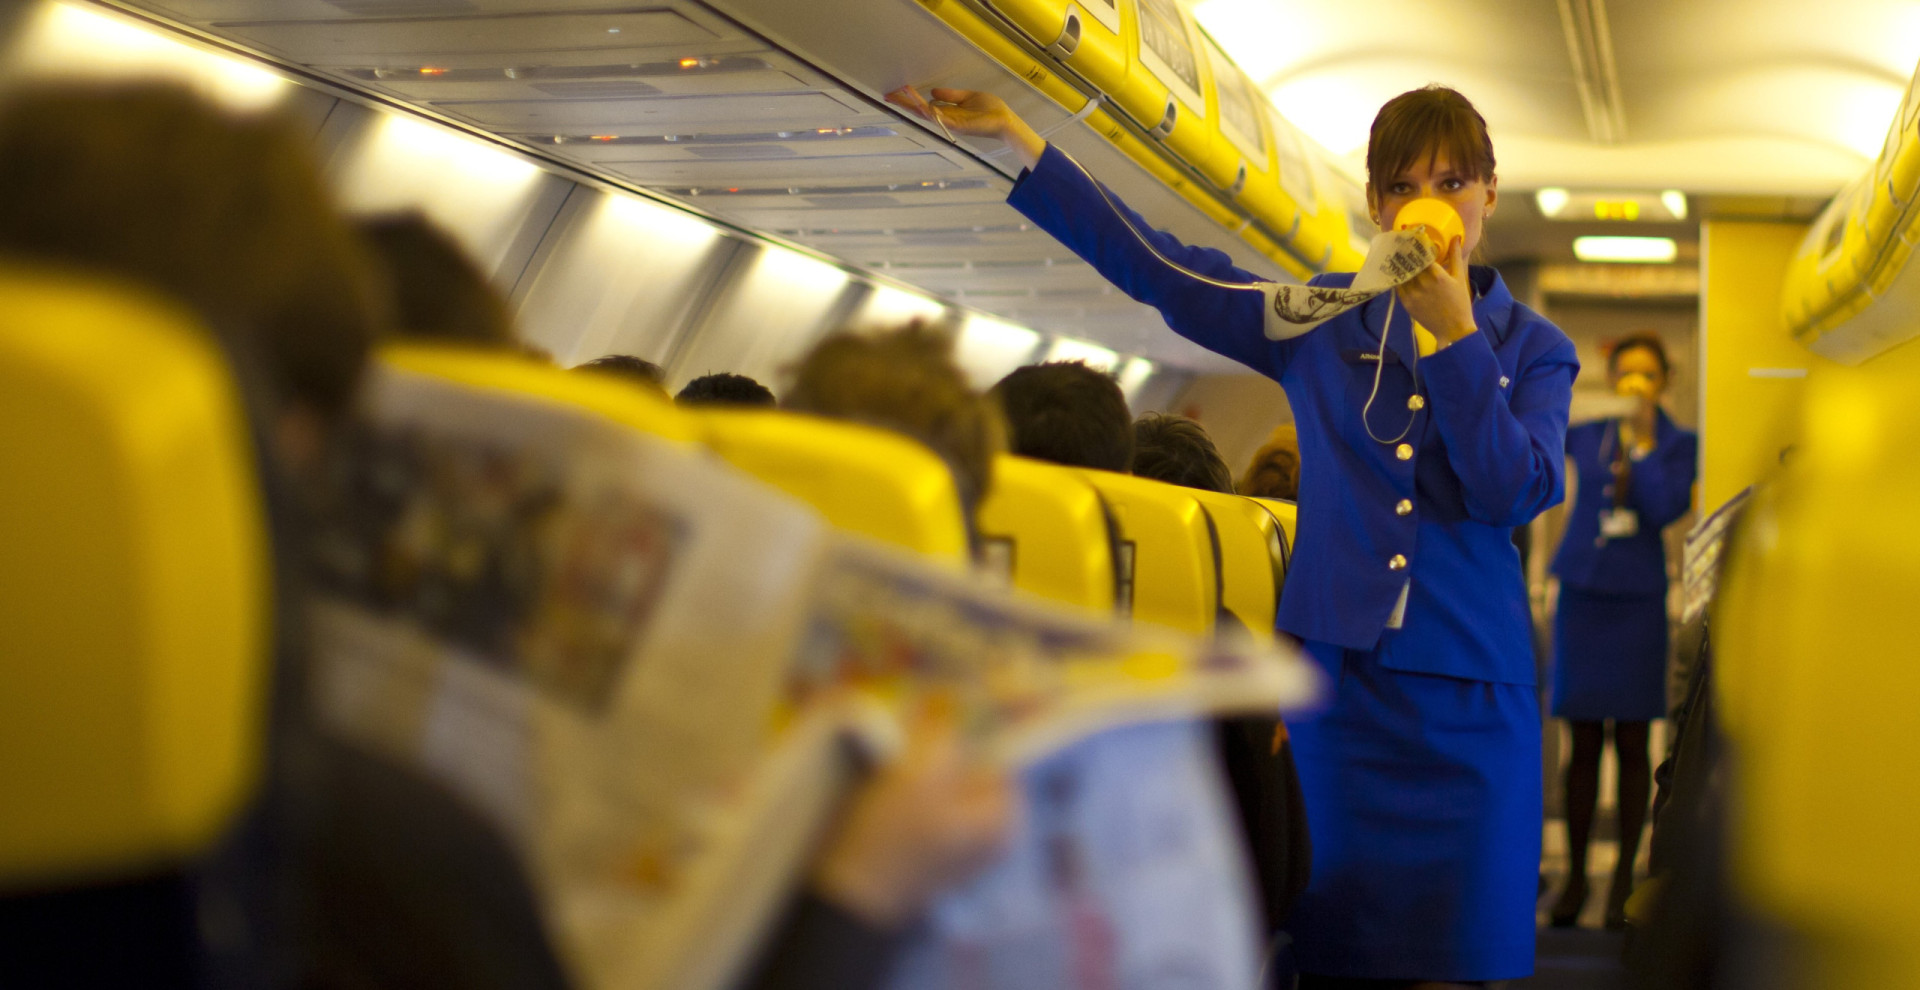 <p>When it comes to <a href="https://www.starsinsider.com/lifestyle/551507/in-flight-etiquette-rules-of-flying-you-should-be-following" rel="noopener">airplane</a> travel, plenty goes on behind the scenes that most passengers are completely unaware of. Sometimes there's a lot of jargon being used by pilots and cabin crew that you might have heard without knowing exactly what it meant. And if flying is a stressful experience for you, not understanding certain terms can add to an already frustrating experience.</p> <p>So click to discover common airline terms to keep you at ease during your next flight. </p><p>You may also like:<a href="https://www.starsinsider.com/n/188995?utm_source=msn.com&utm_medium=display&utm_campaign=referral_description&utm_content=732333en-us"> Superfoods that could change your life</a></p>